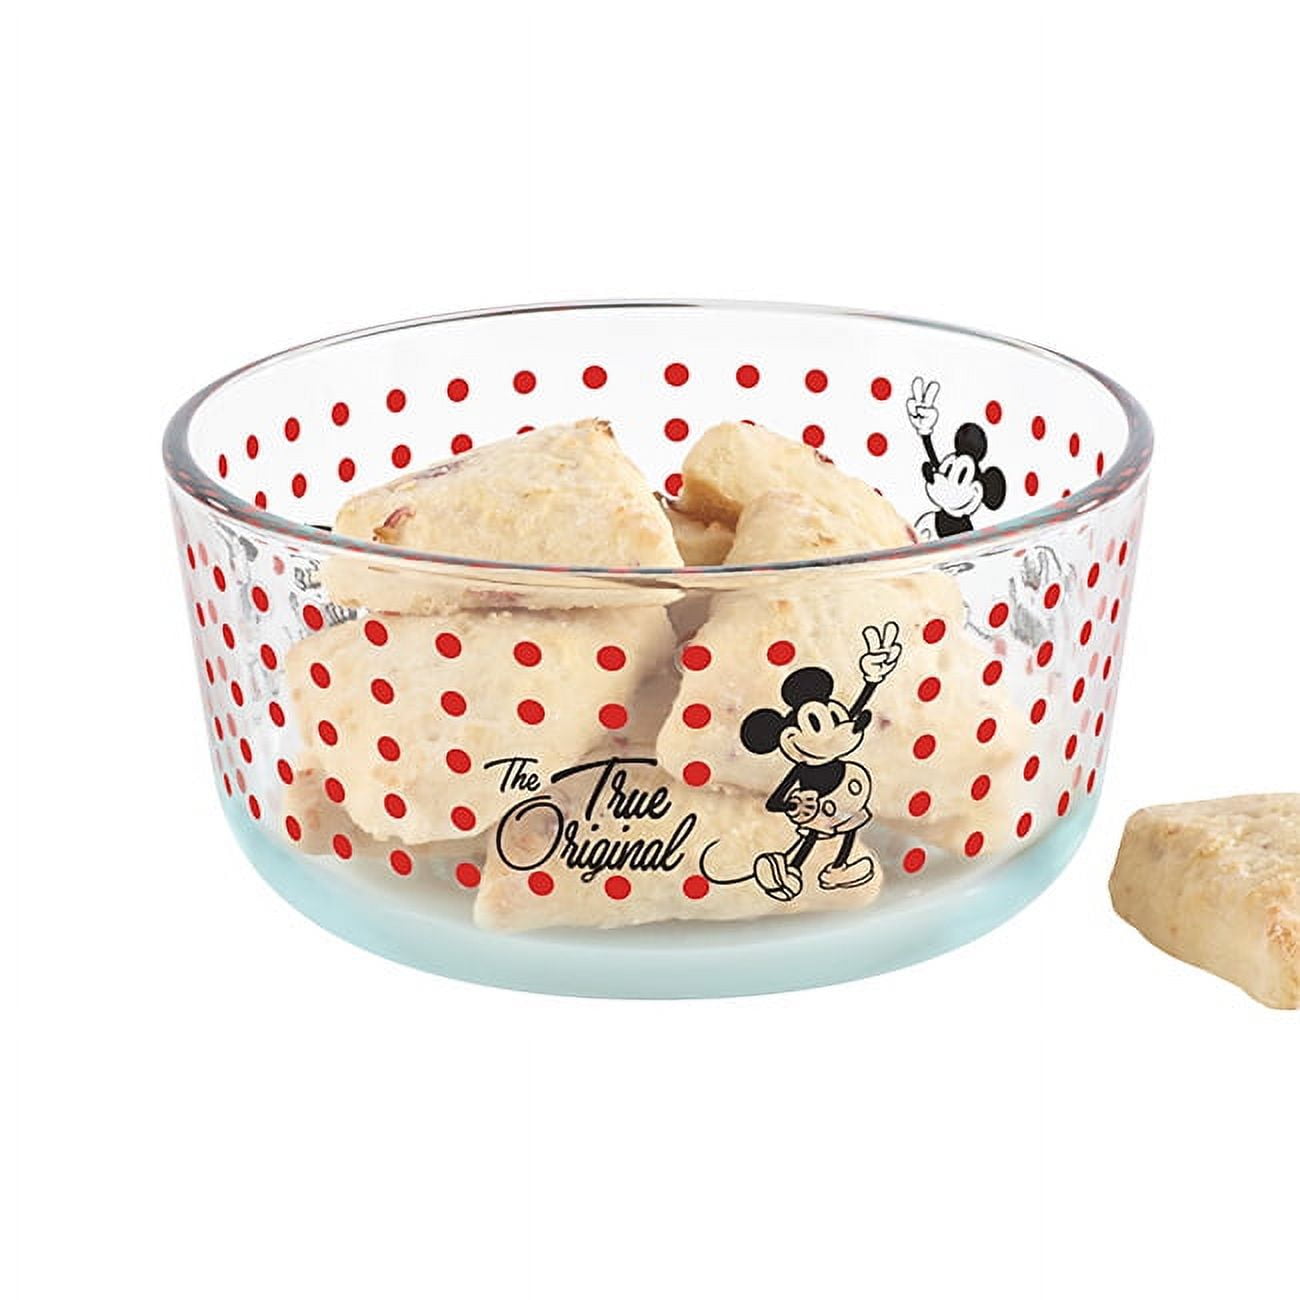 Mickey Mouse Pyrex Collection Makes Leftovers Magical - Decor 